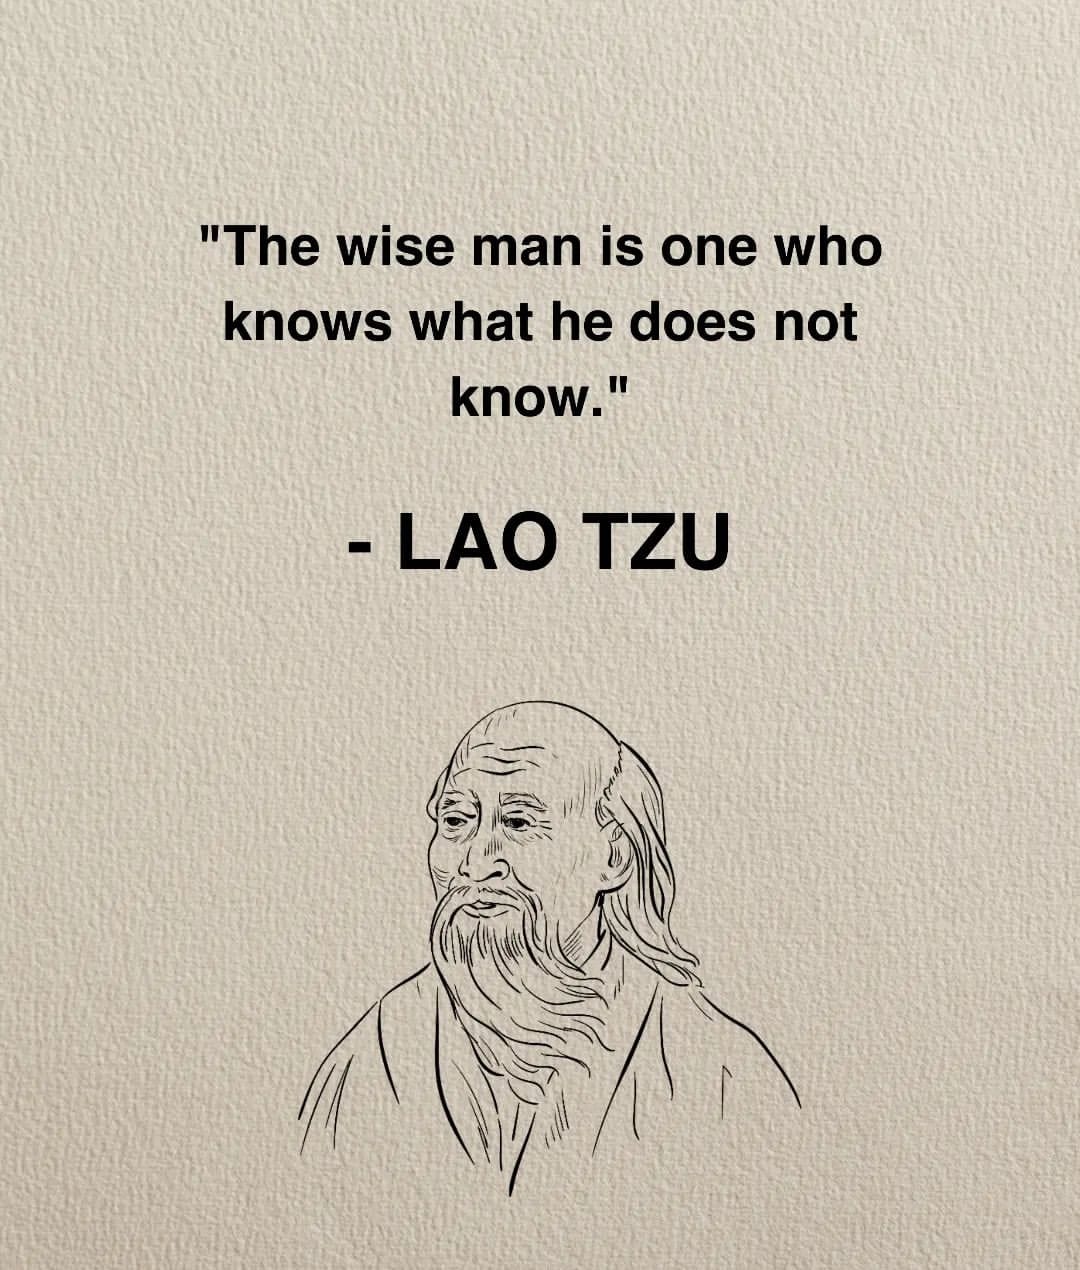 The wise man is one who, knows, what he does not know.